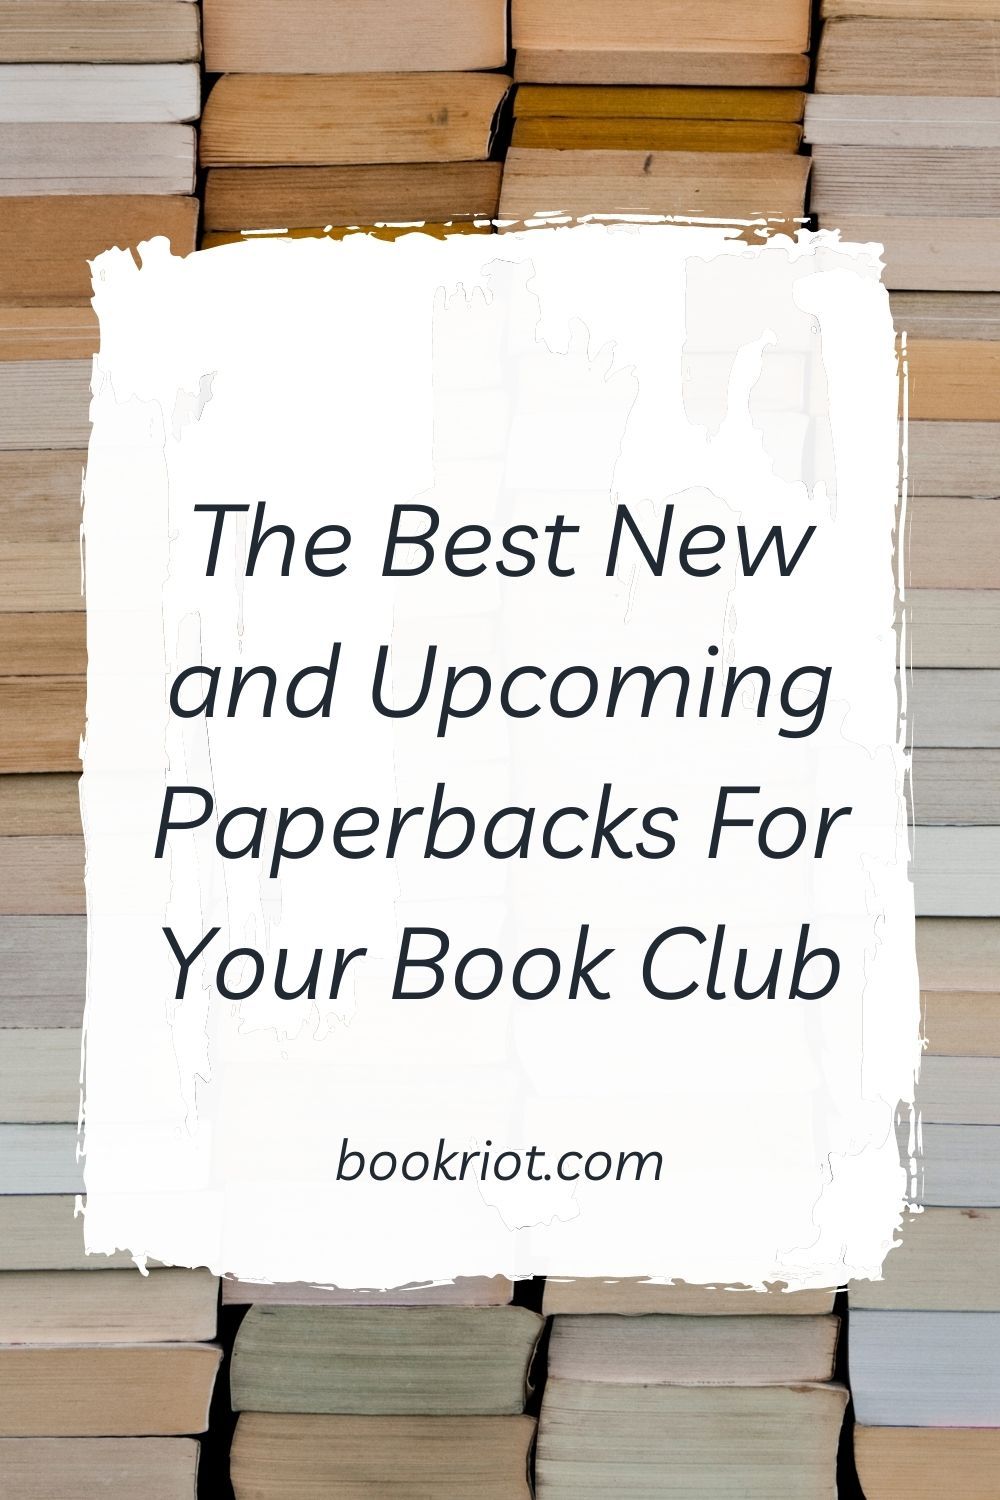 The Best New and Paperbacks for Your Book Club